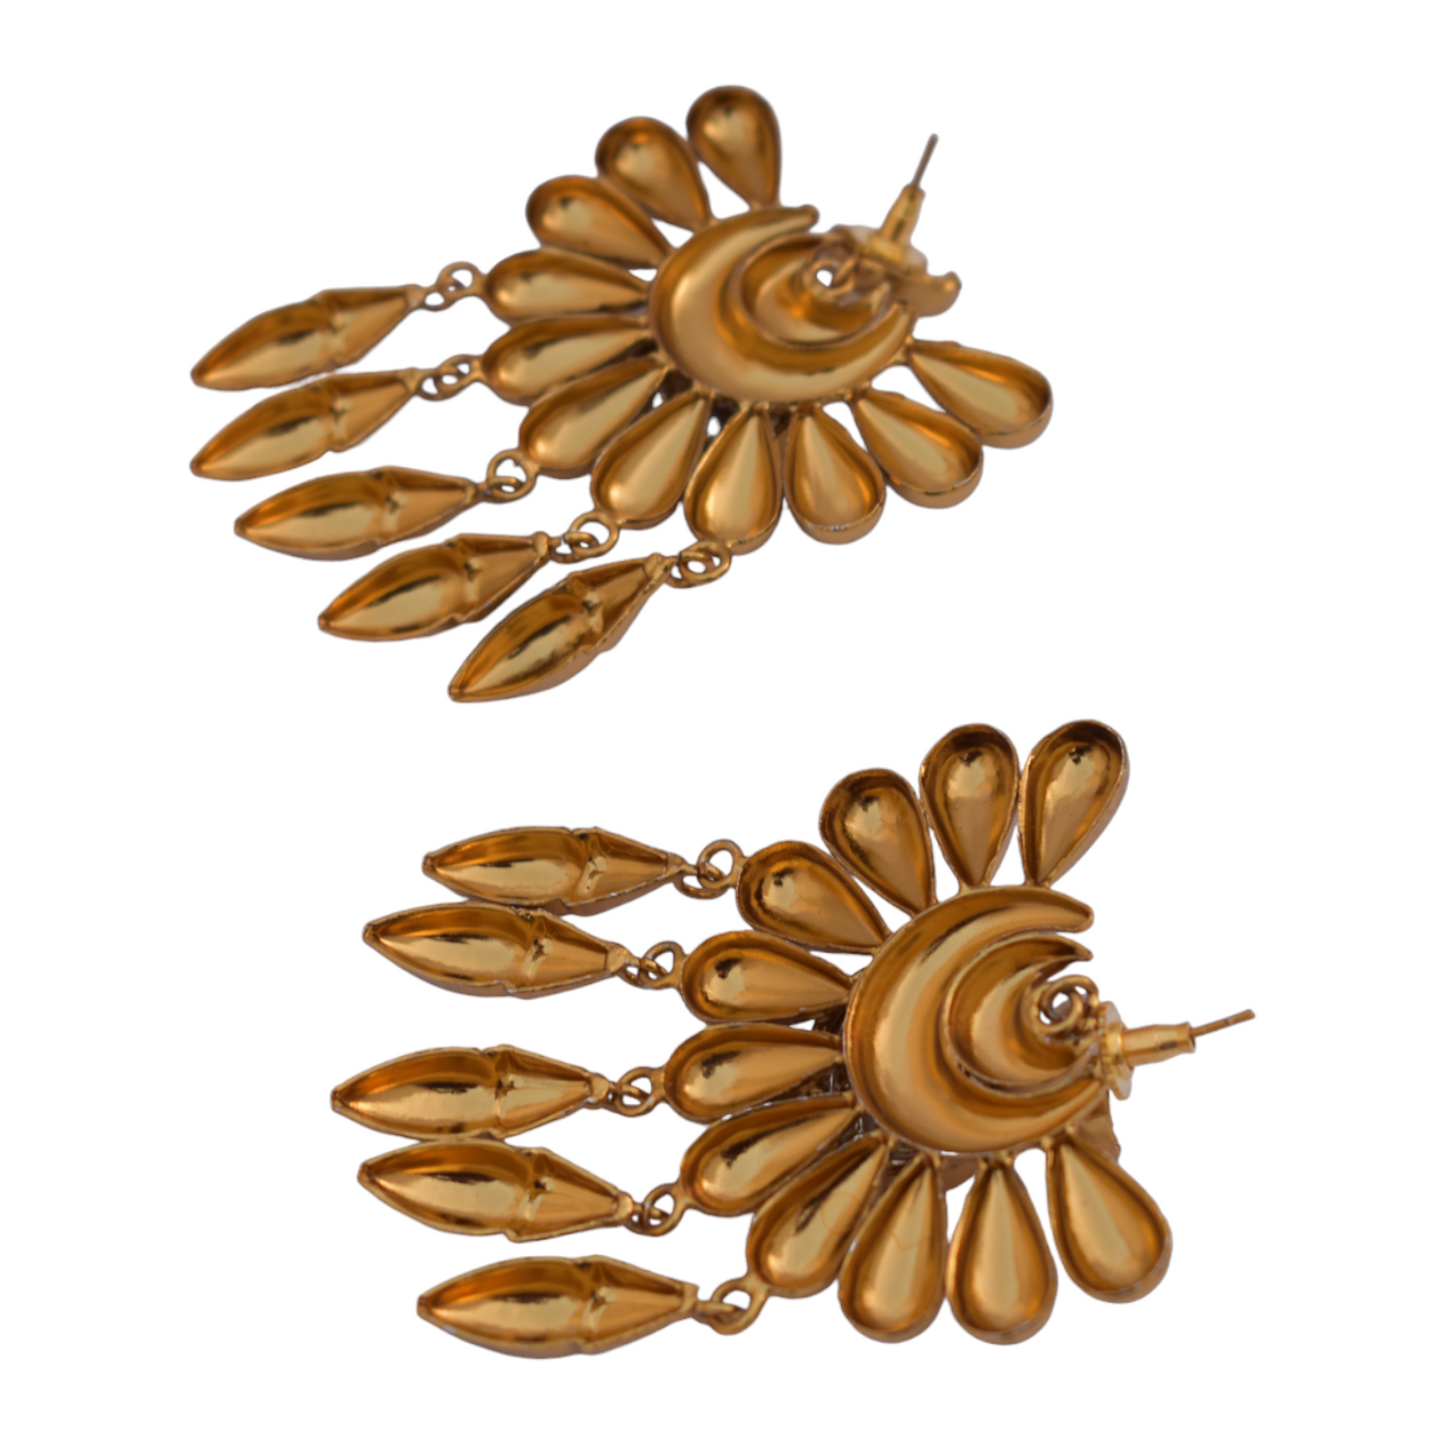 A pair of antique gold finish earing